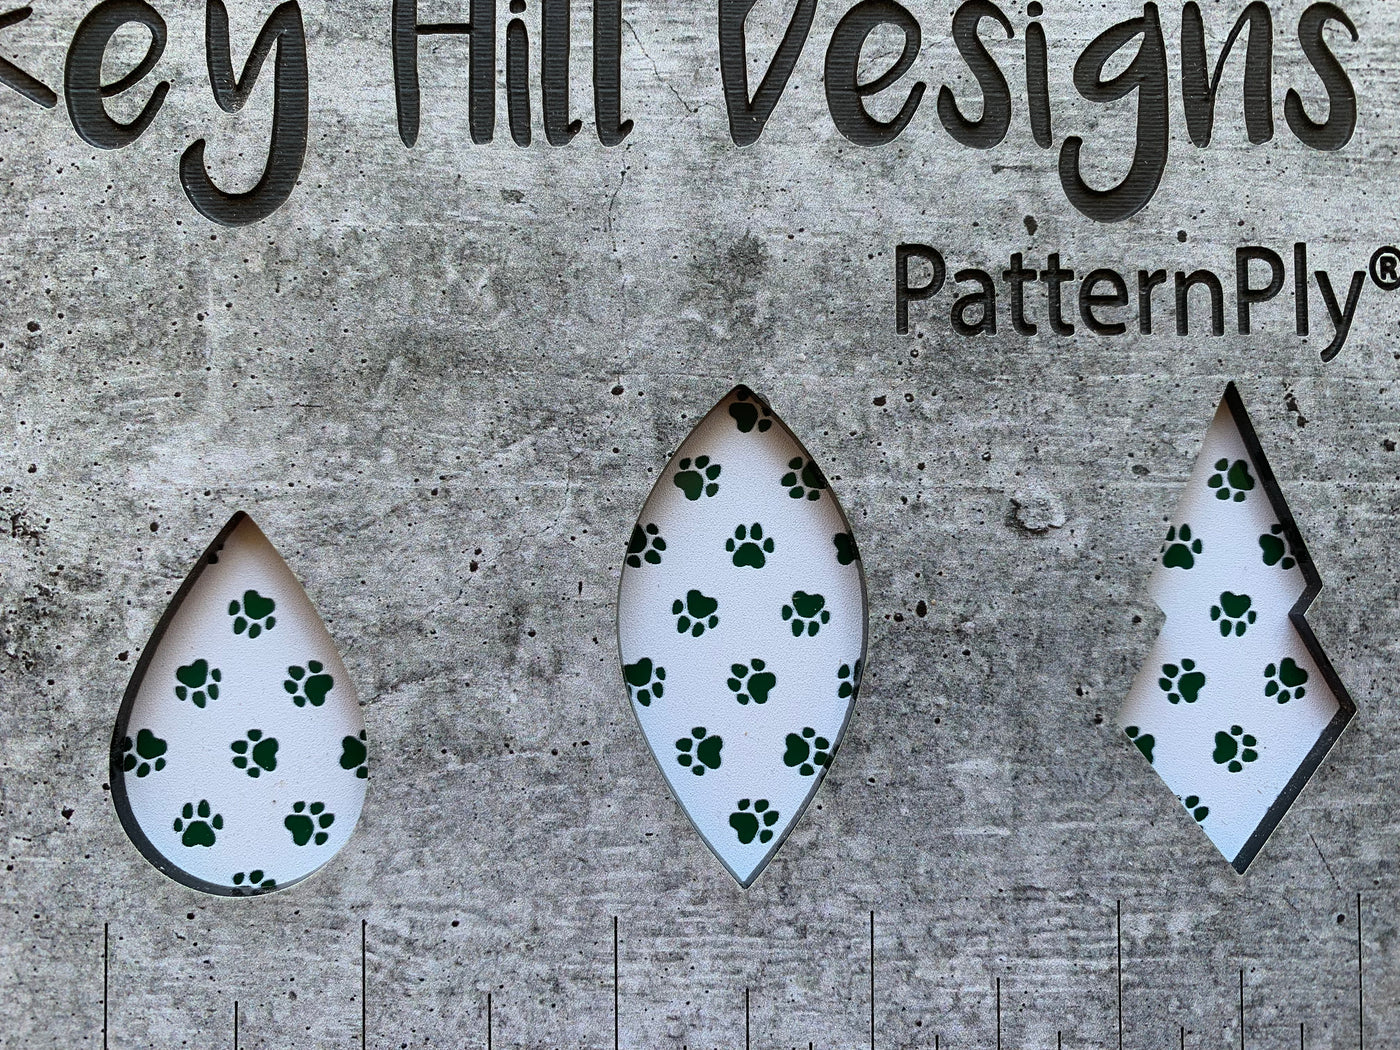 PatternPly® Scattered Pawprints WHITE